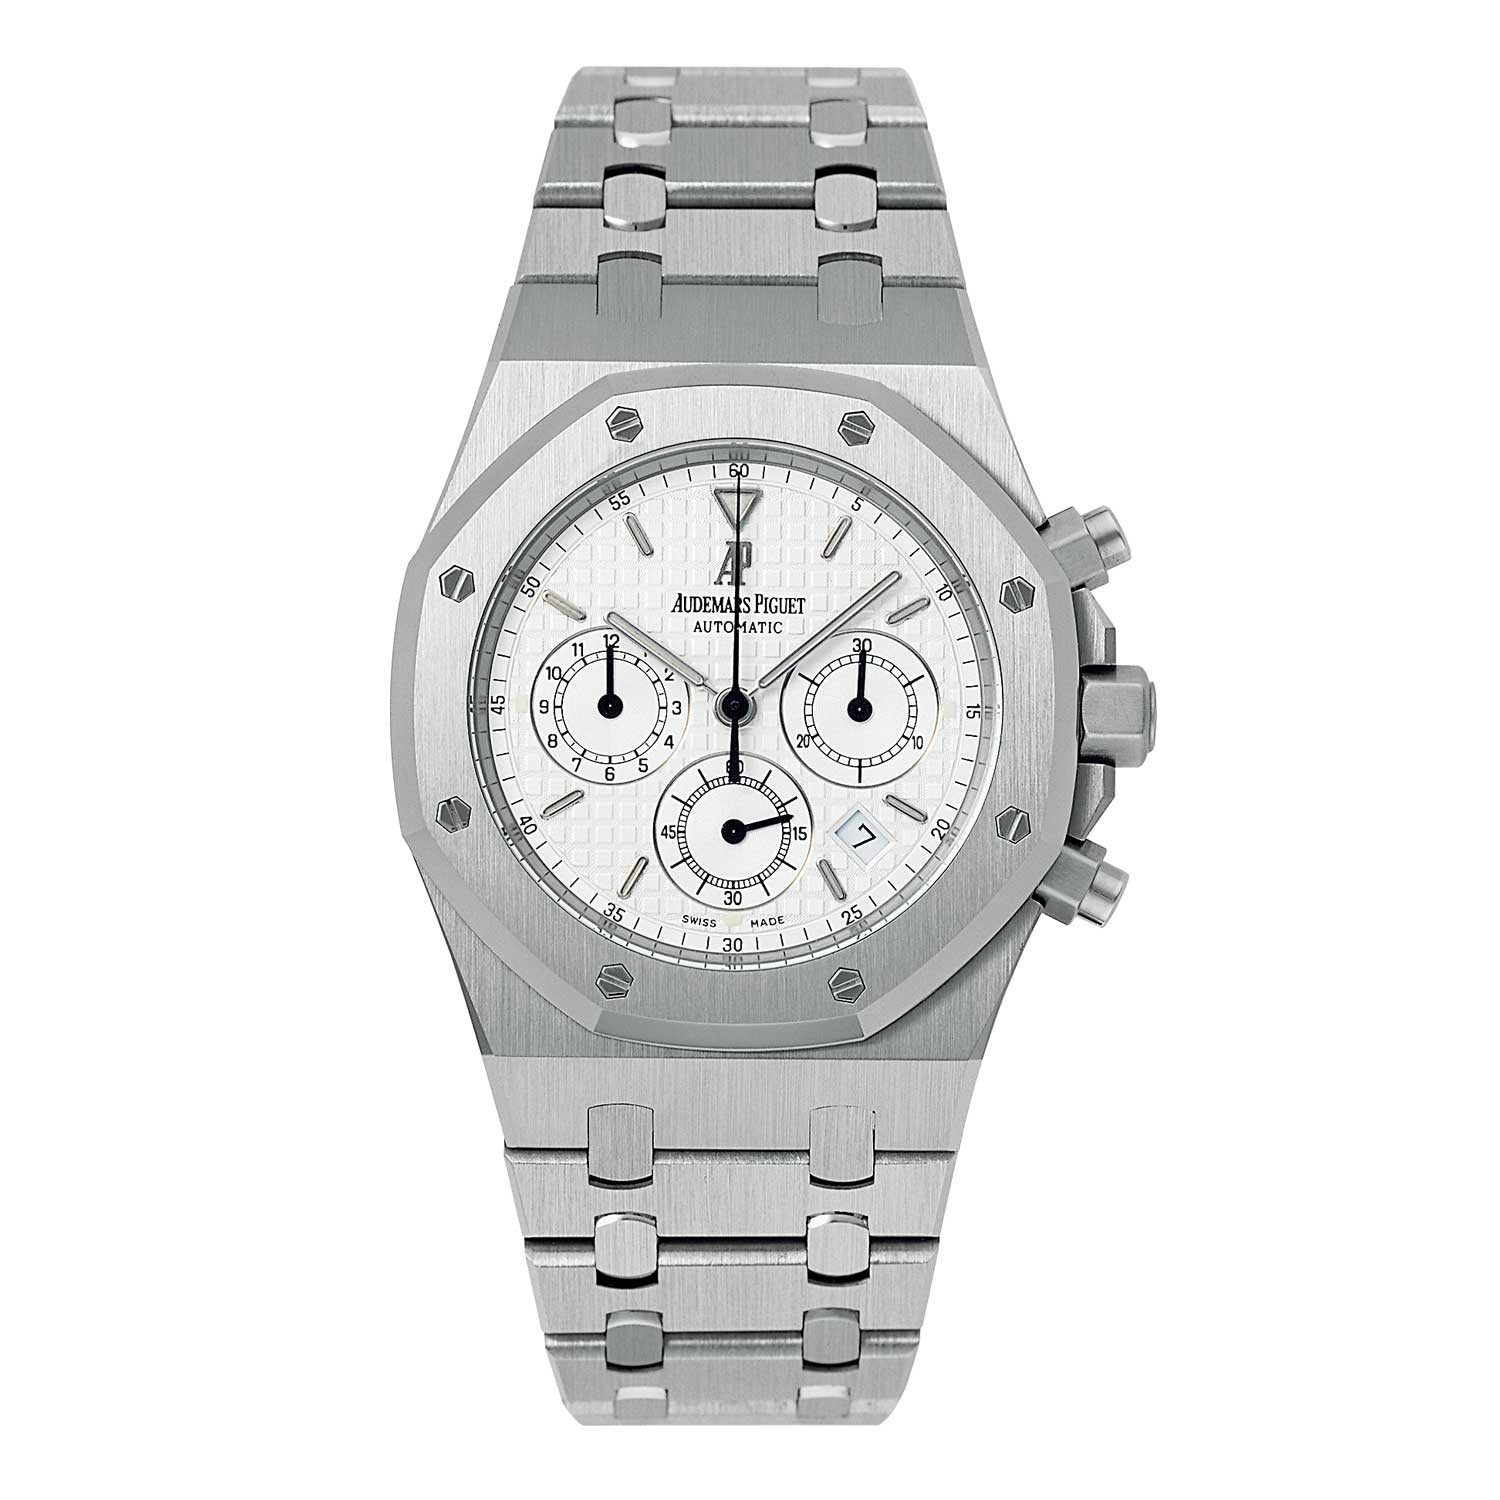 The very first Royal Oak Chronograph ref. 25860, released in 1997